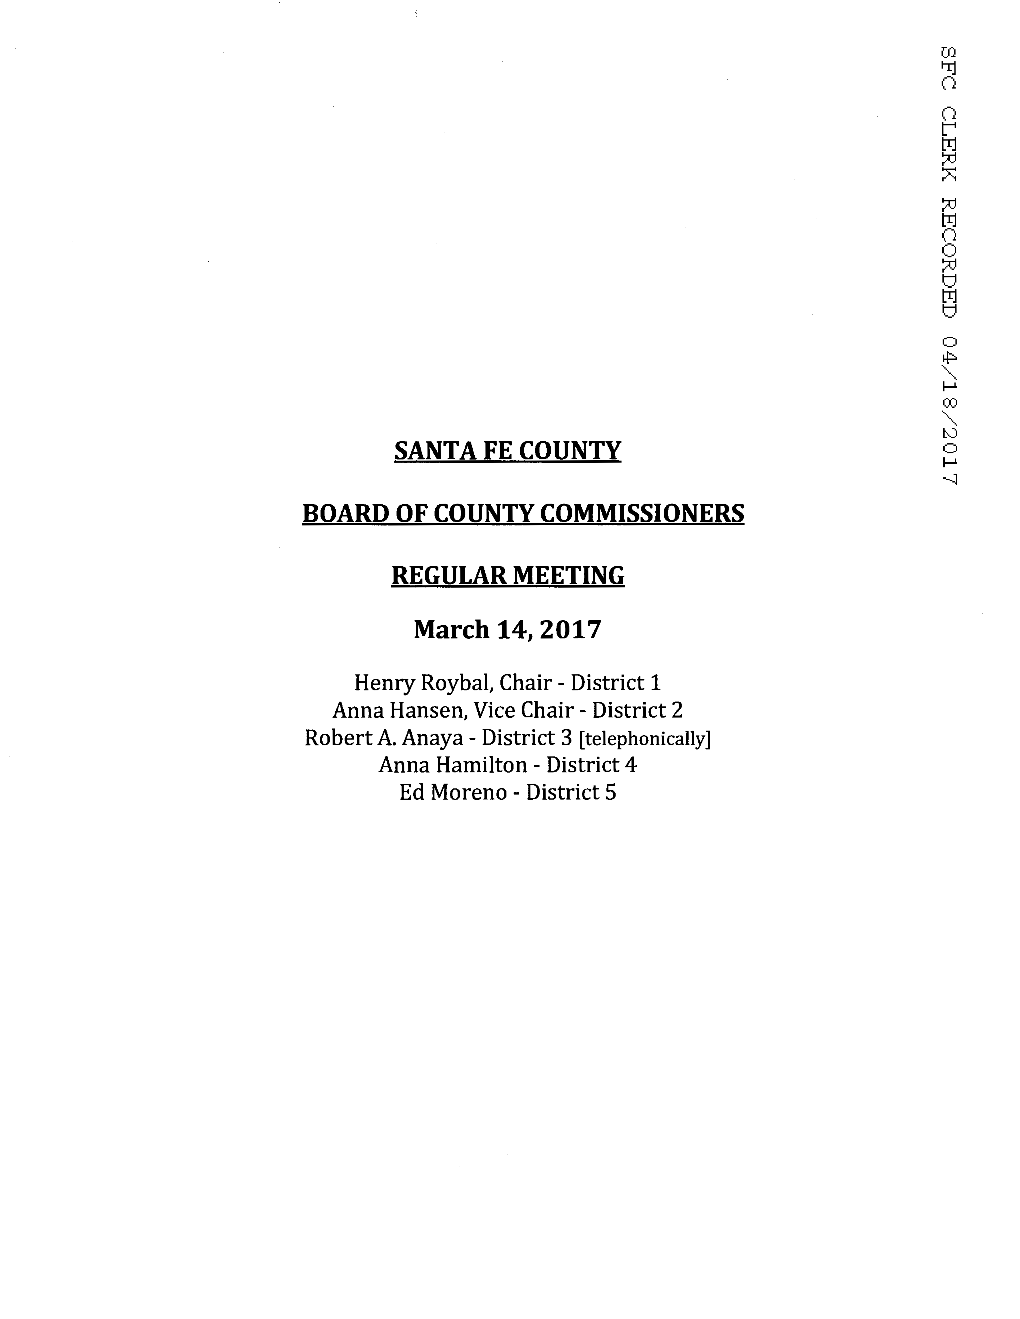 Santa Fe County Regular Meeting Board of County Commissioners